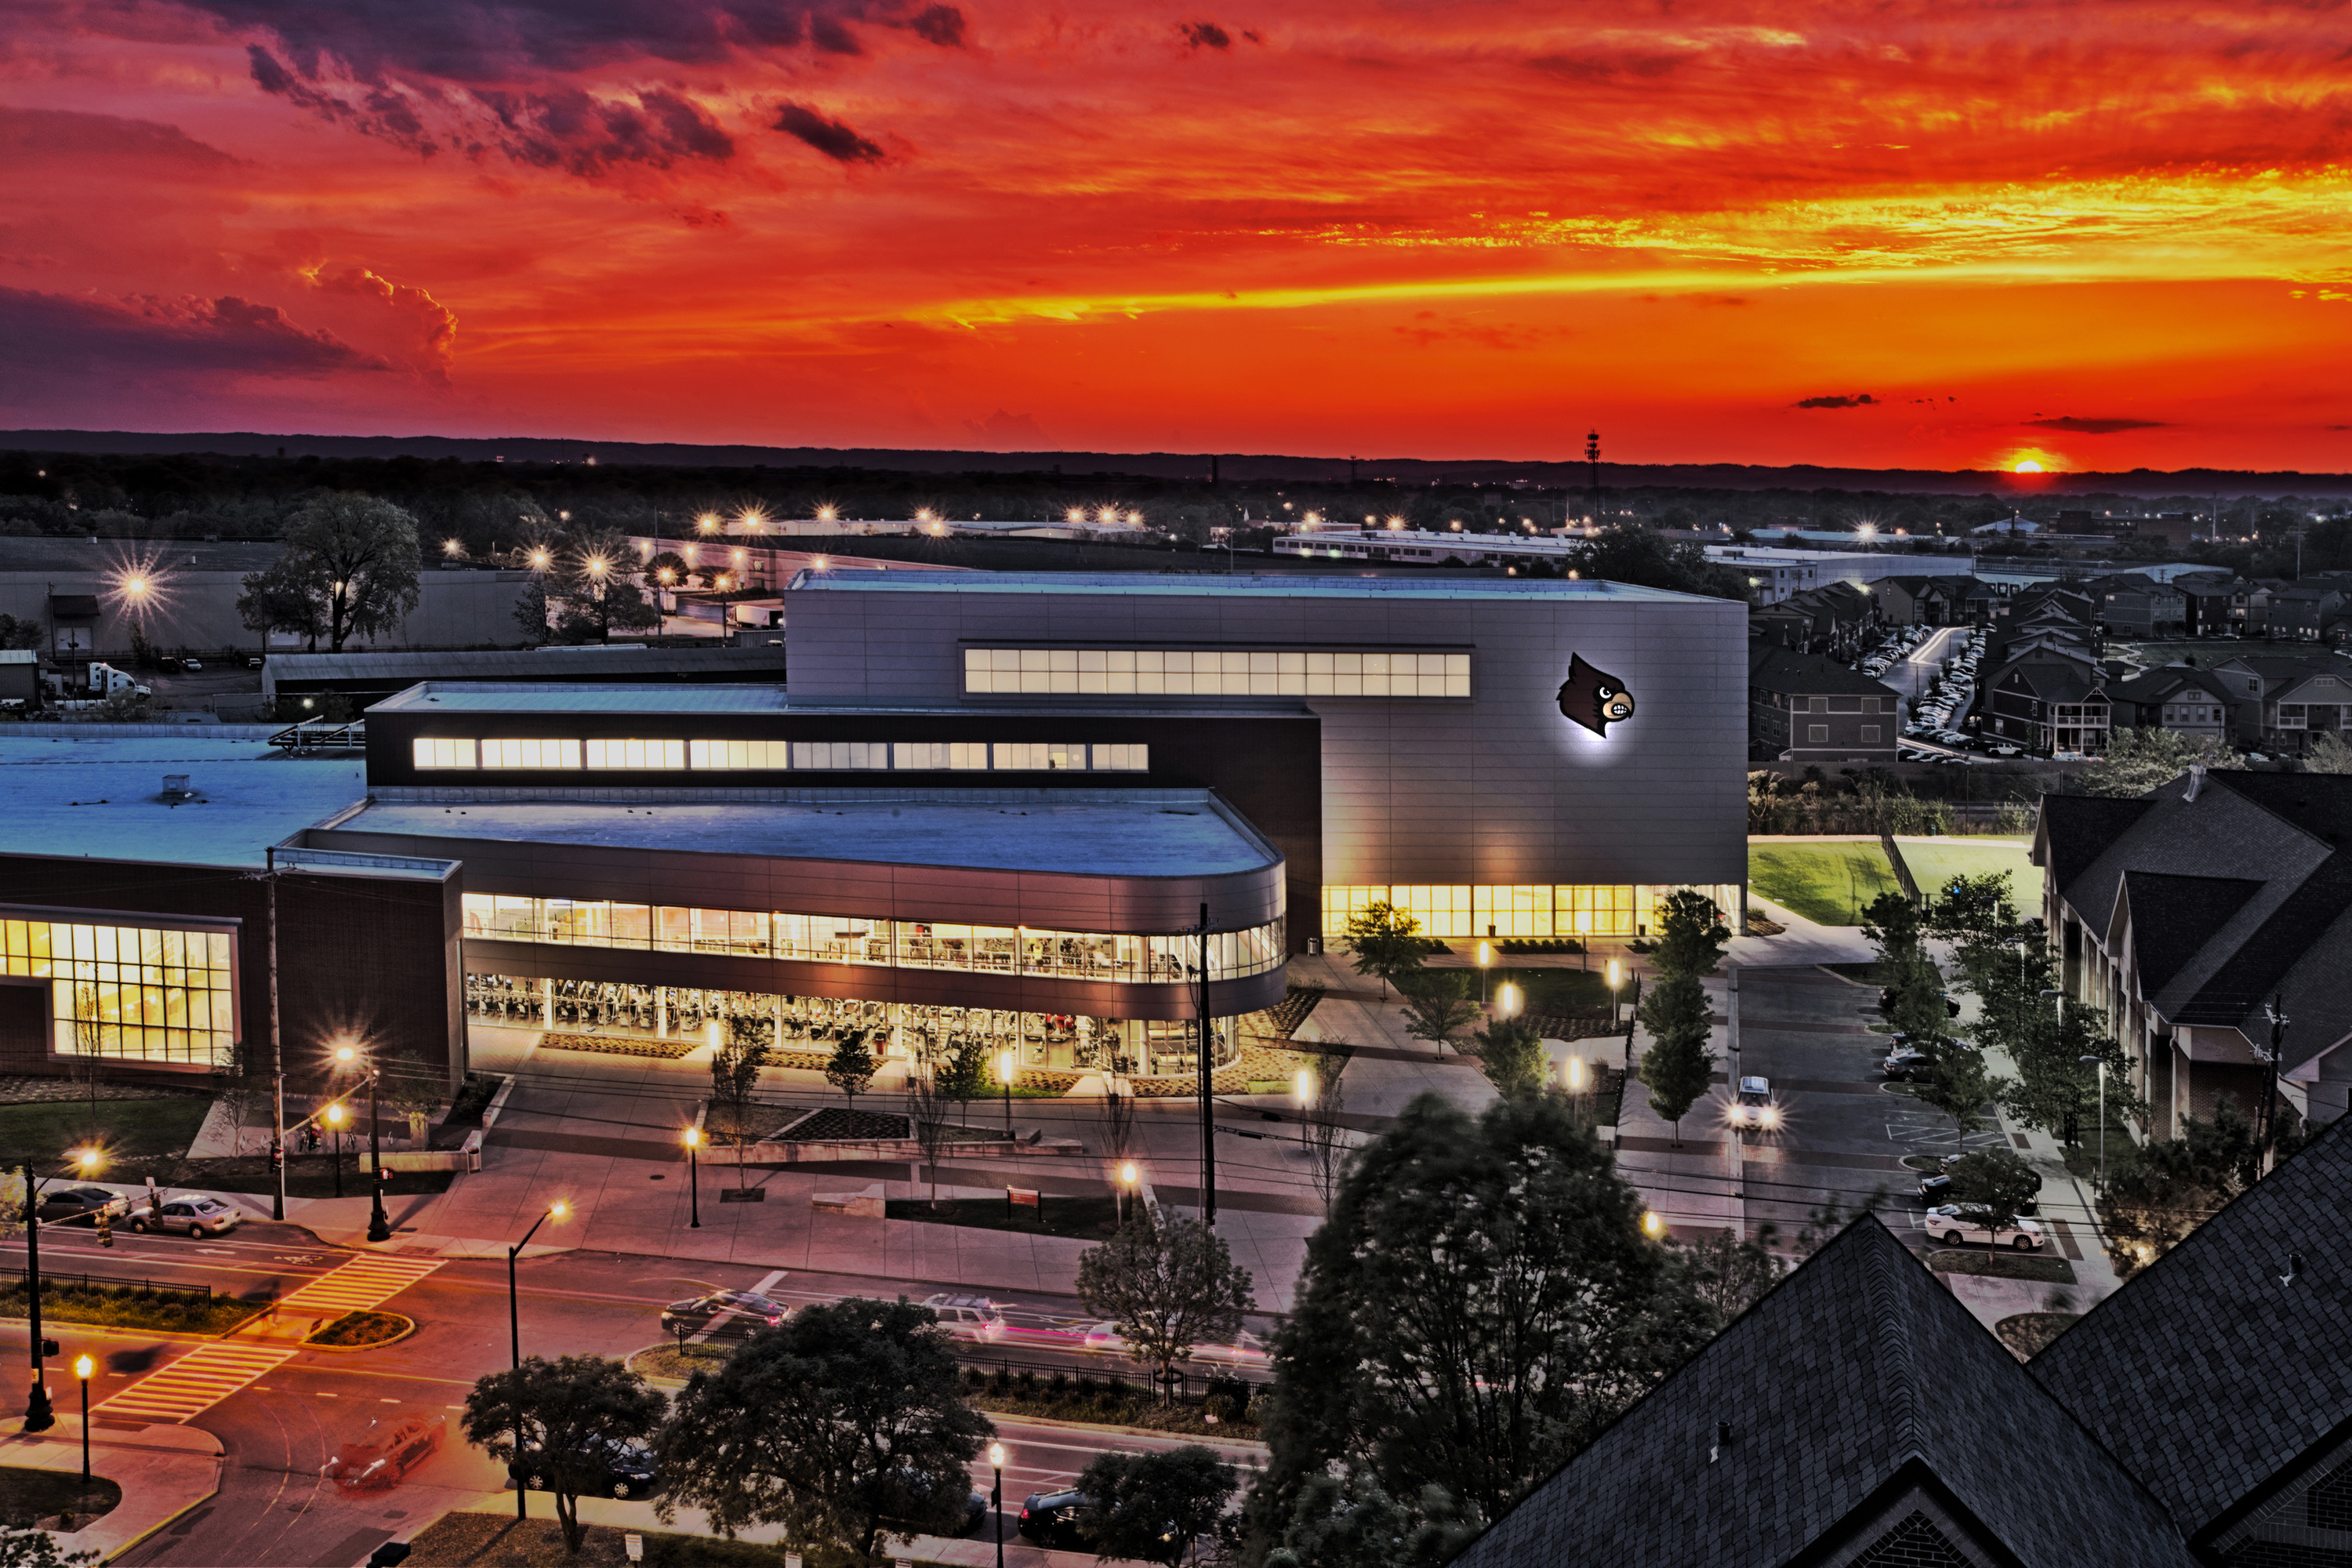 Student Recreation Center with a sunset behind it